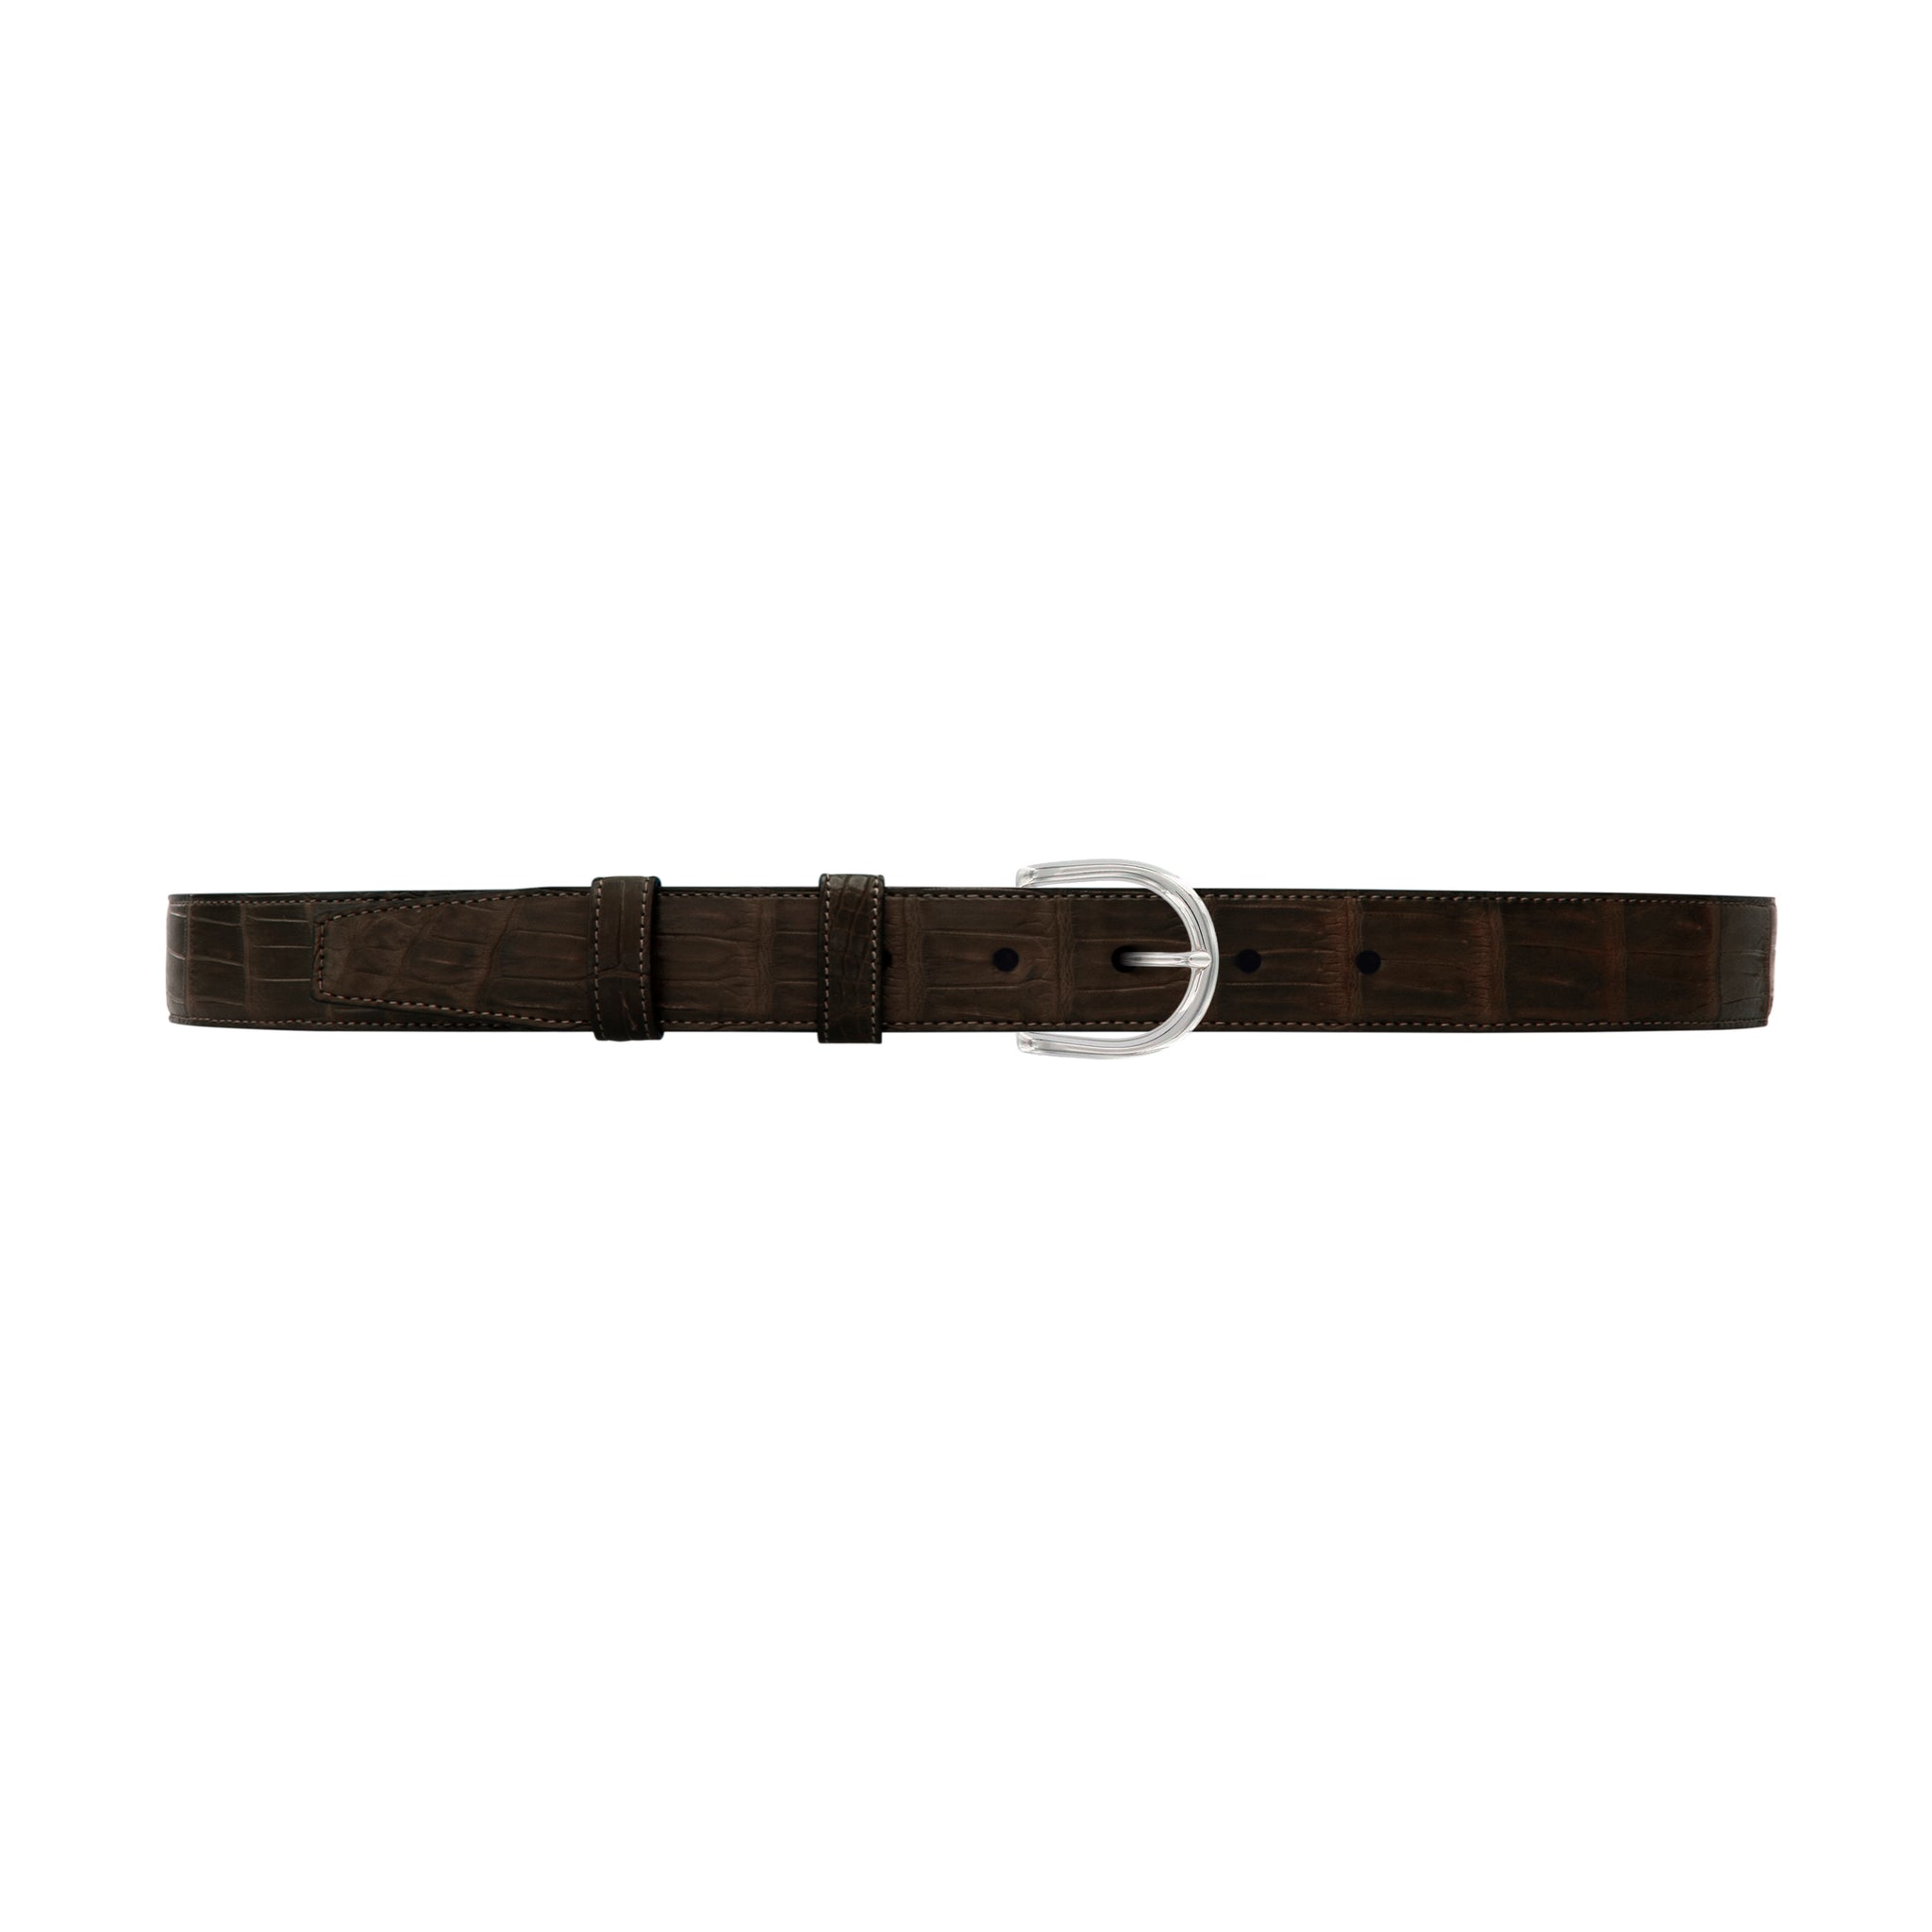 1" Espresso Classic Belt with Denver Casual Buckle in Polished Nickel